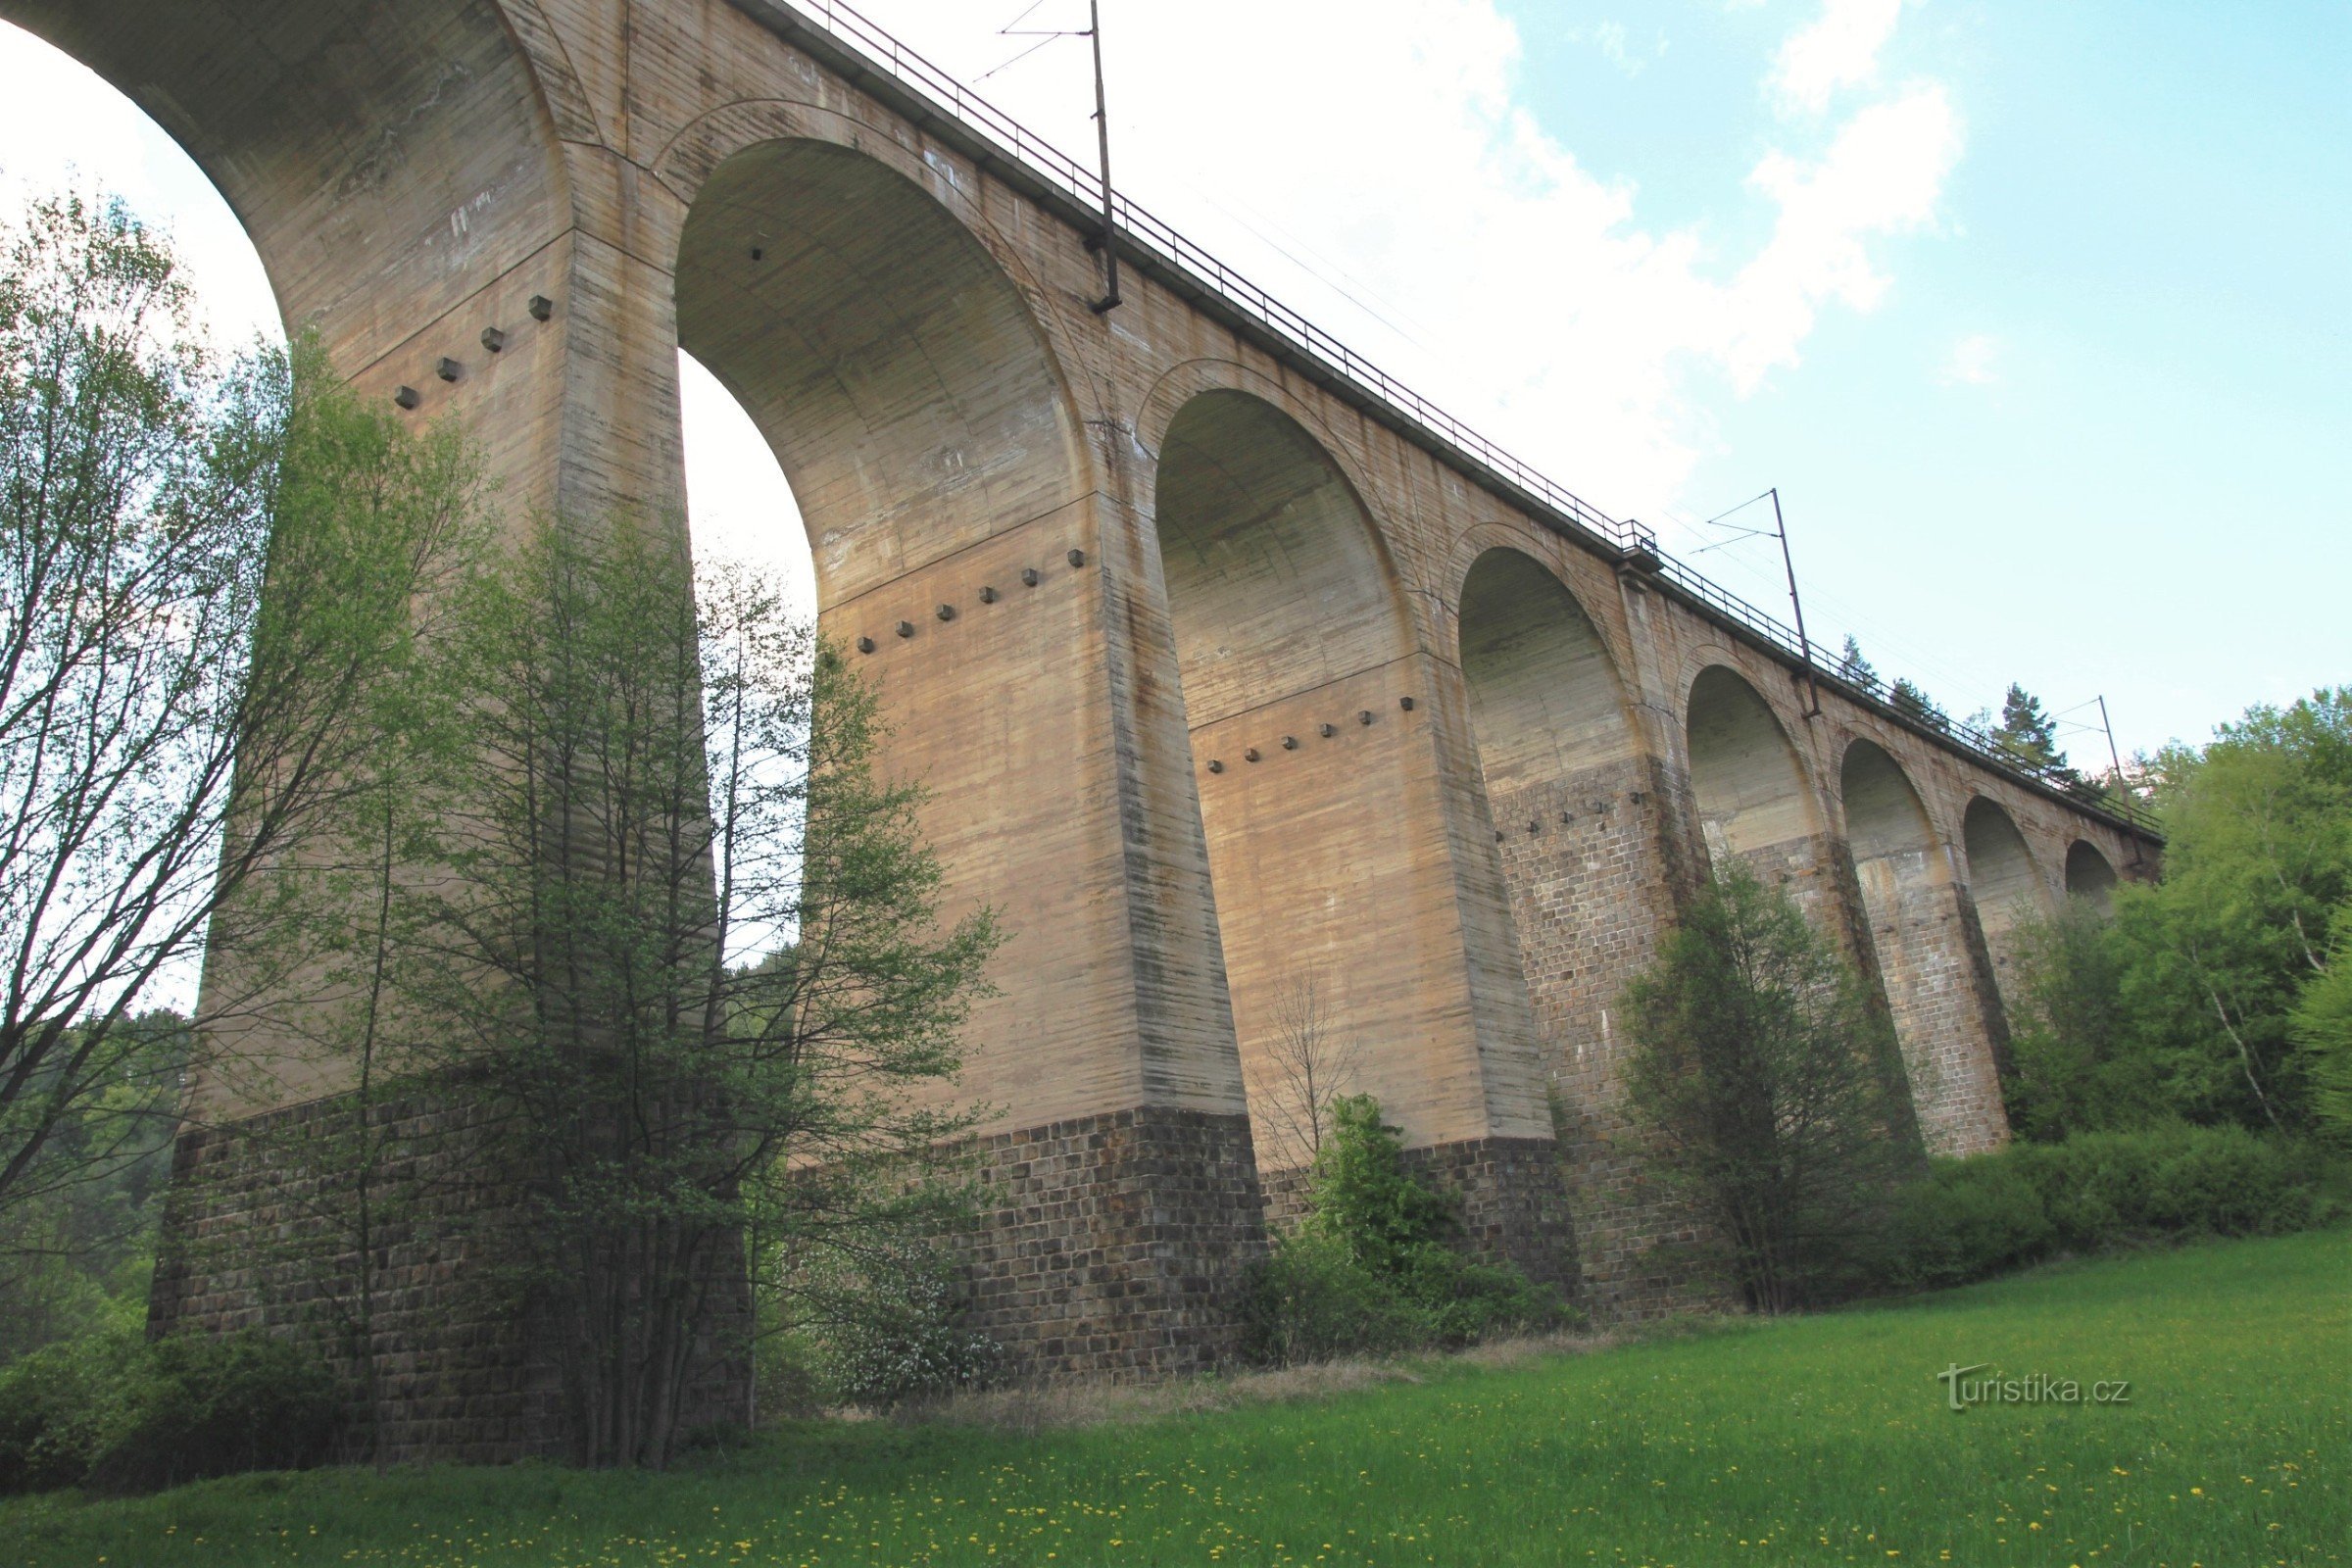 A large viaduct crossing the wide valley of the Libochovka river